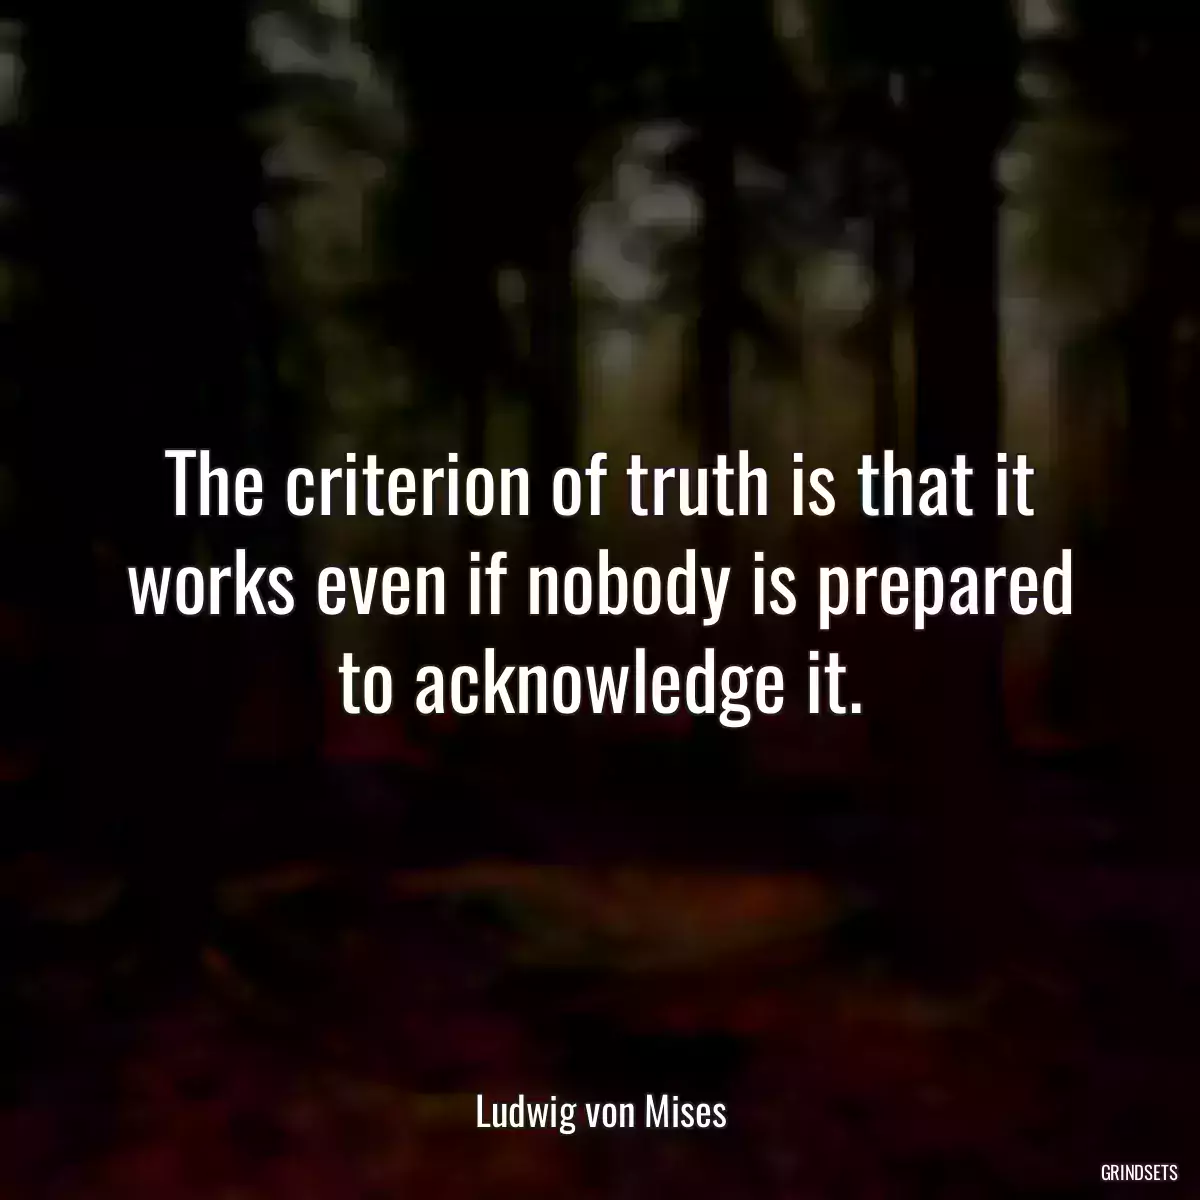 The criterion of truth is that it works even if nobody is prepared to acknowledge it.